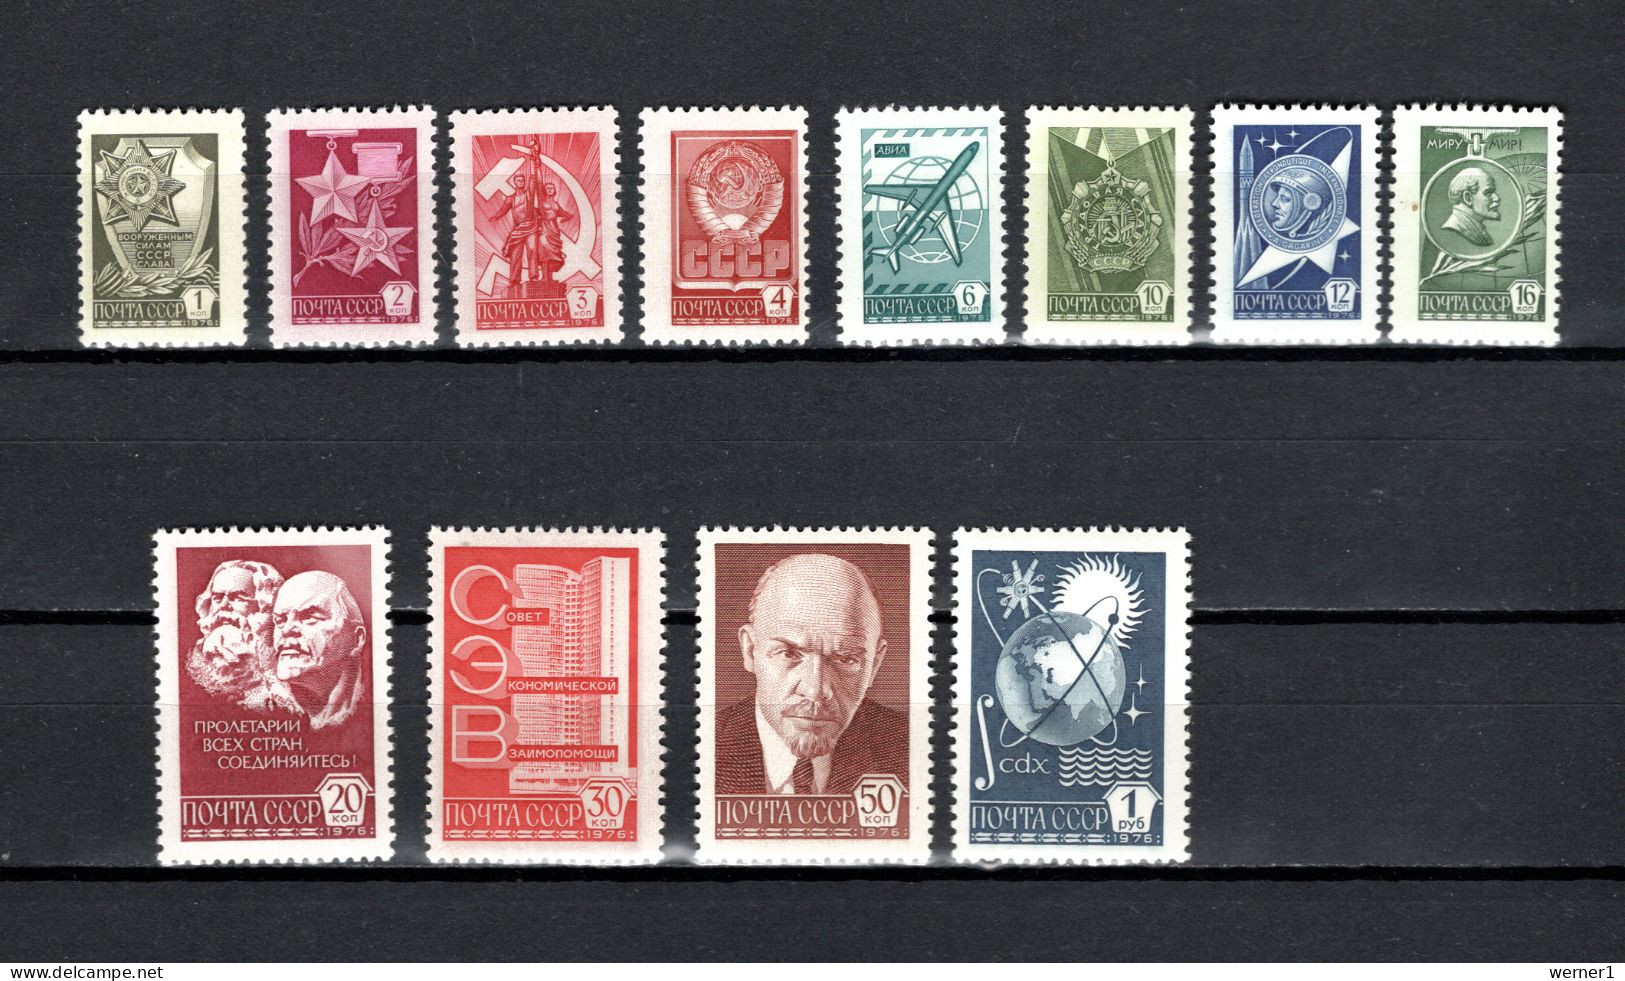 USSR Russia 1976 Space, Definitives Symbols Set Of 12 MNH - Russia & USSR